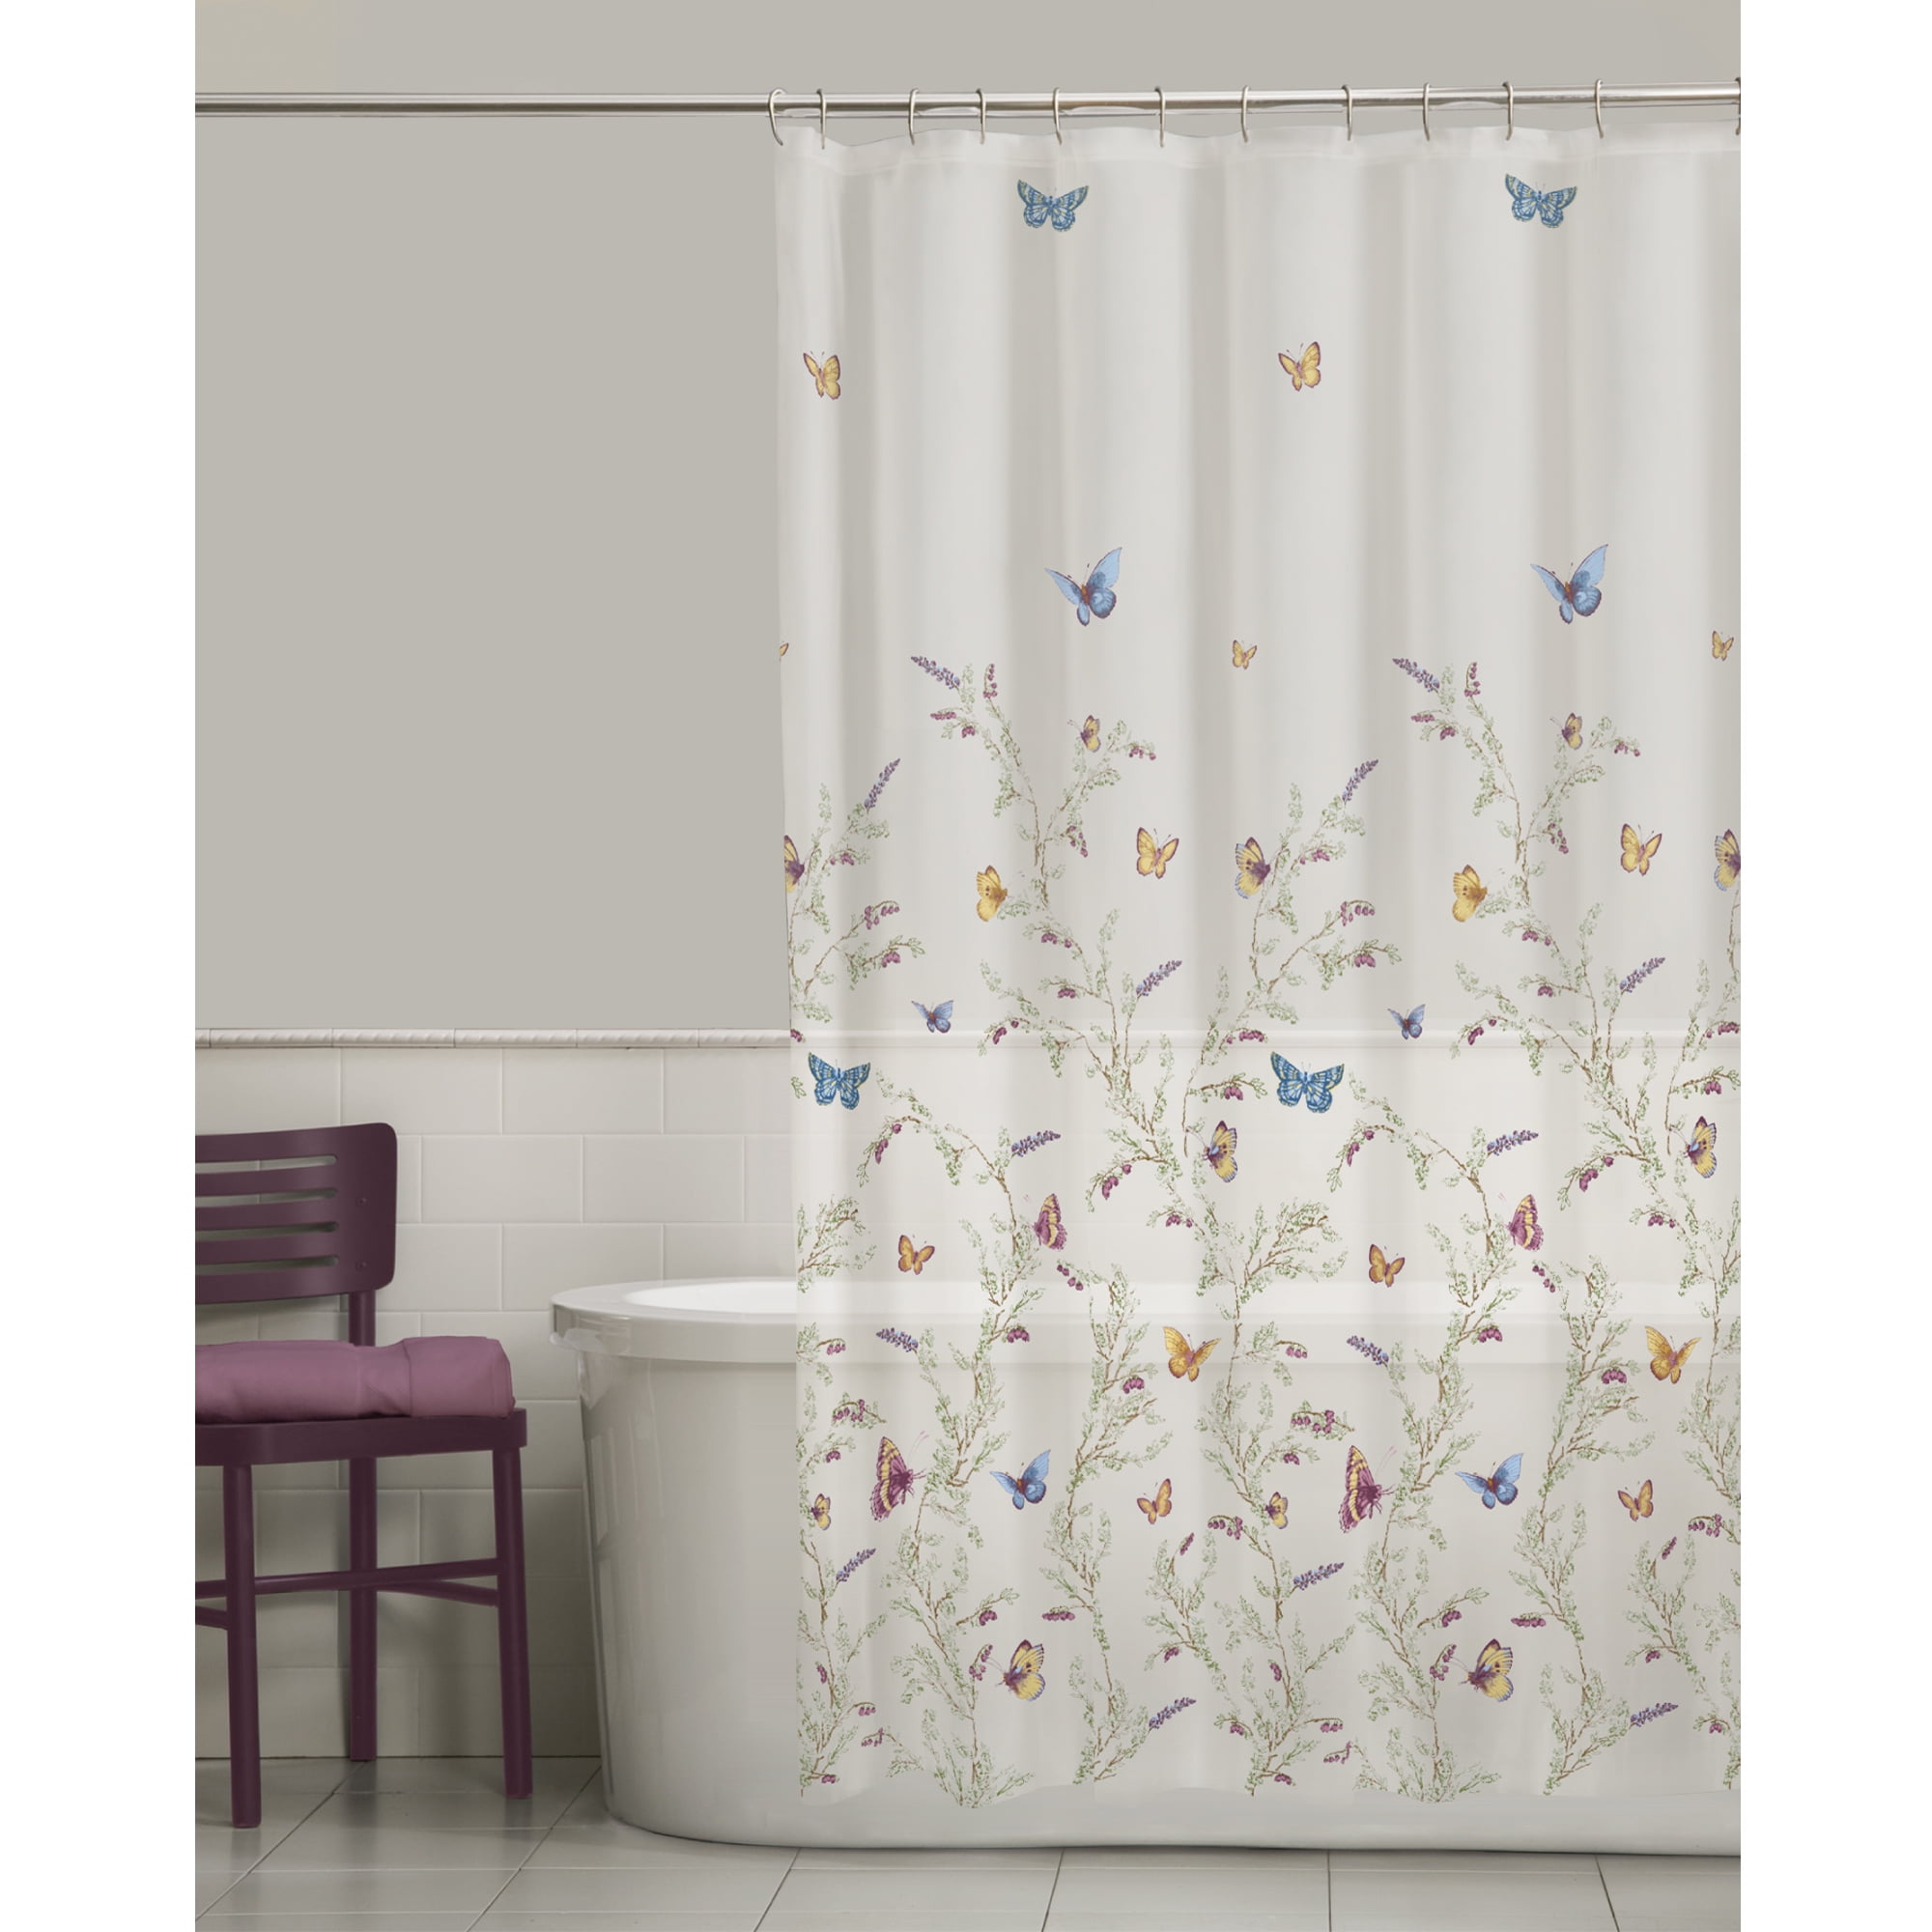 Details about   Zenna Home Flutterby PEVA Shower Curtain Butterfly Multi-colored Easy Care NEW 